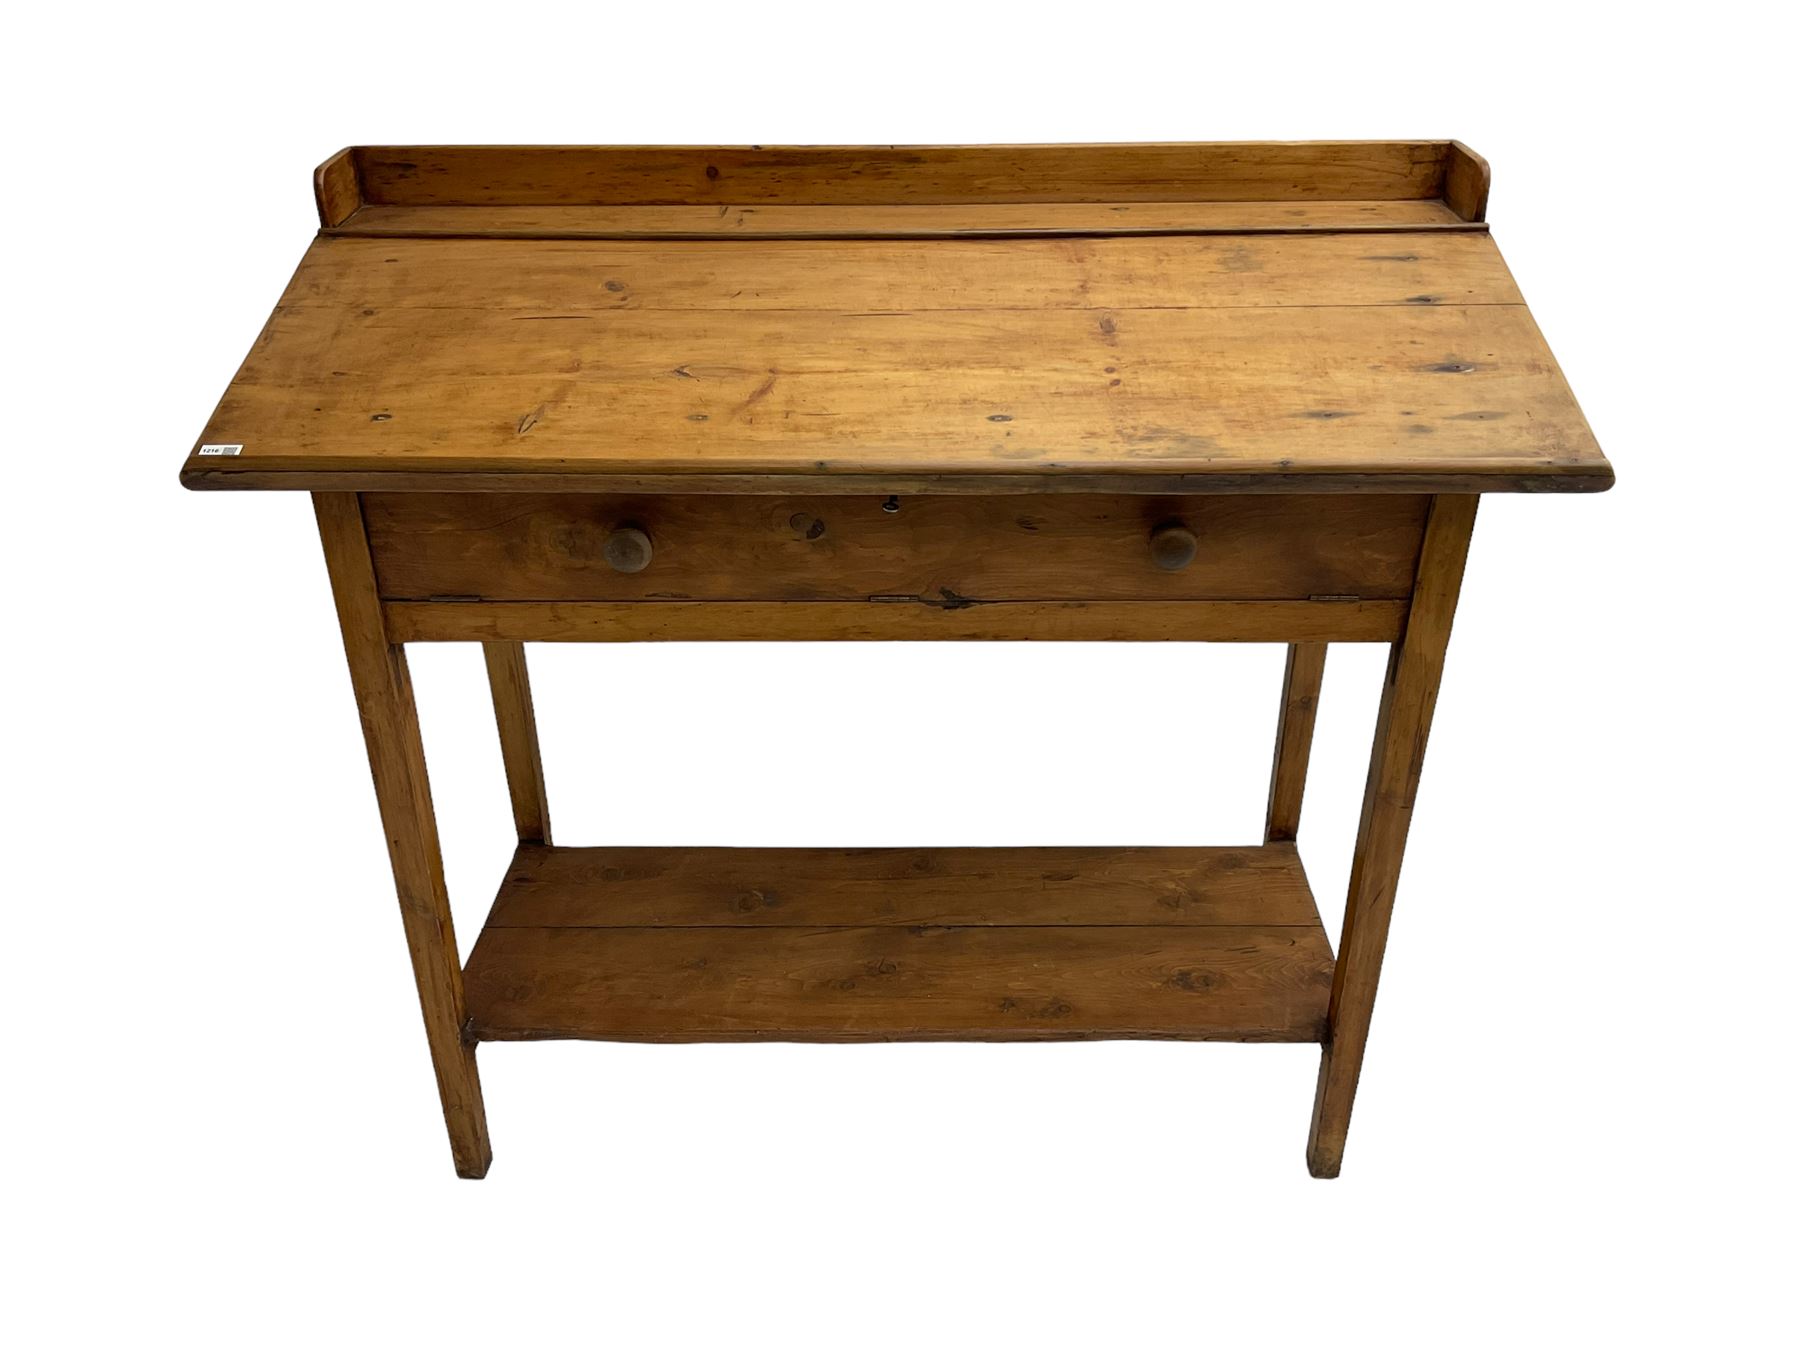 Stained pine clerks desk or table - Image 2 of 6